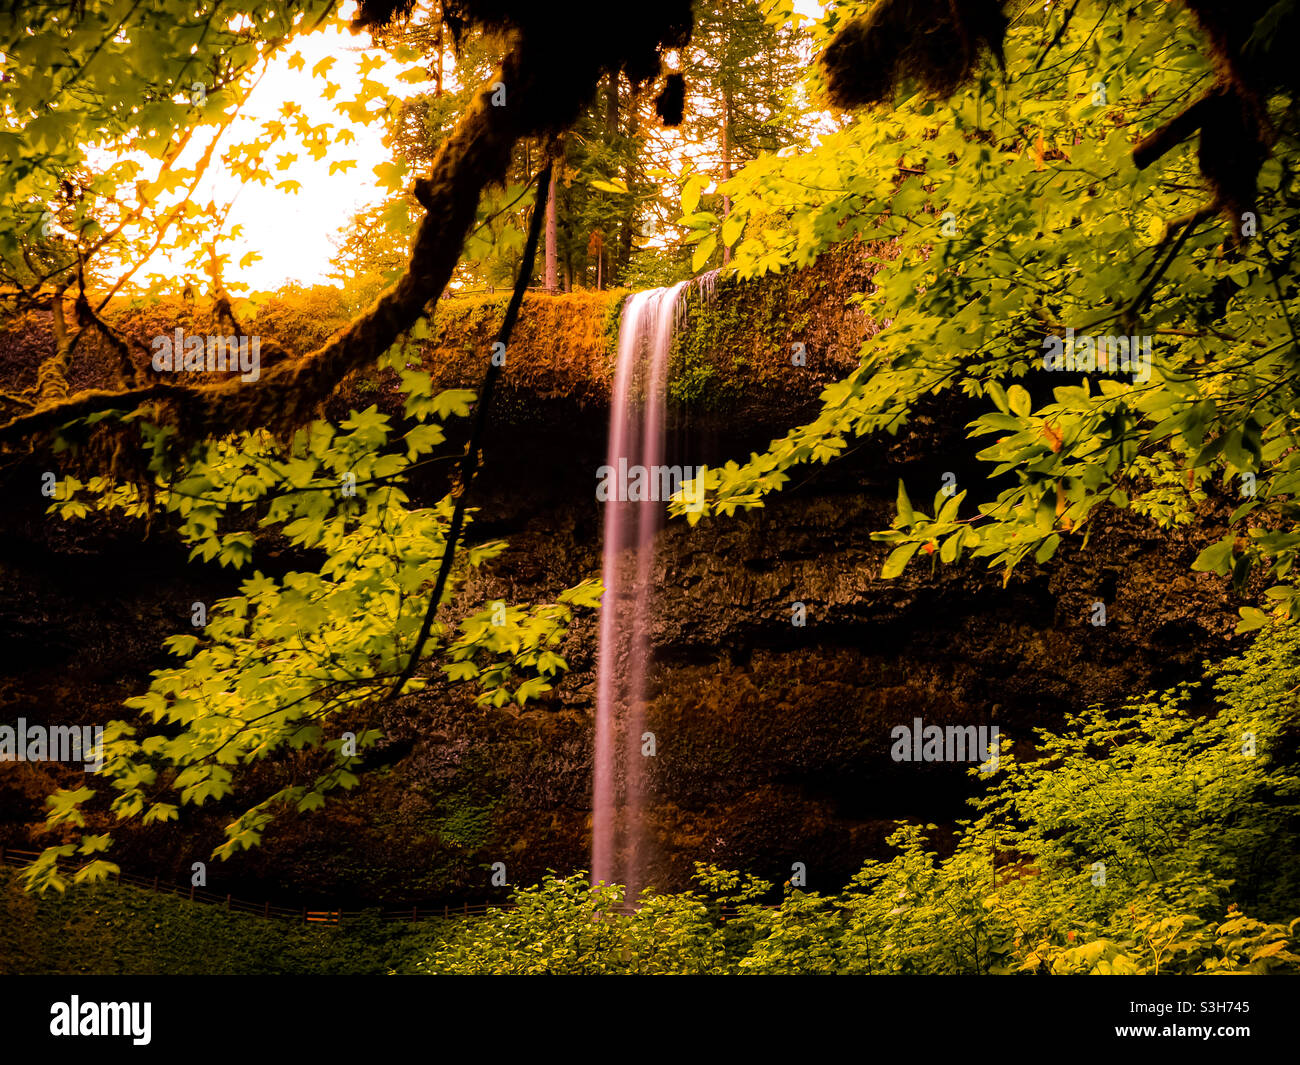 Waterfall through a clearing of branches on a morning hike in the forest. Stock Photo